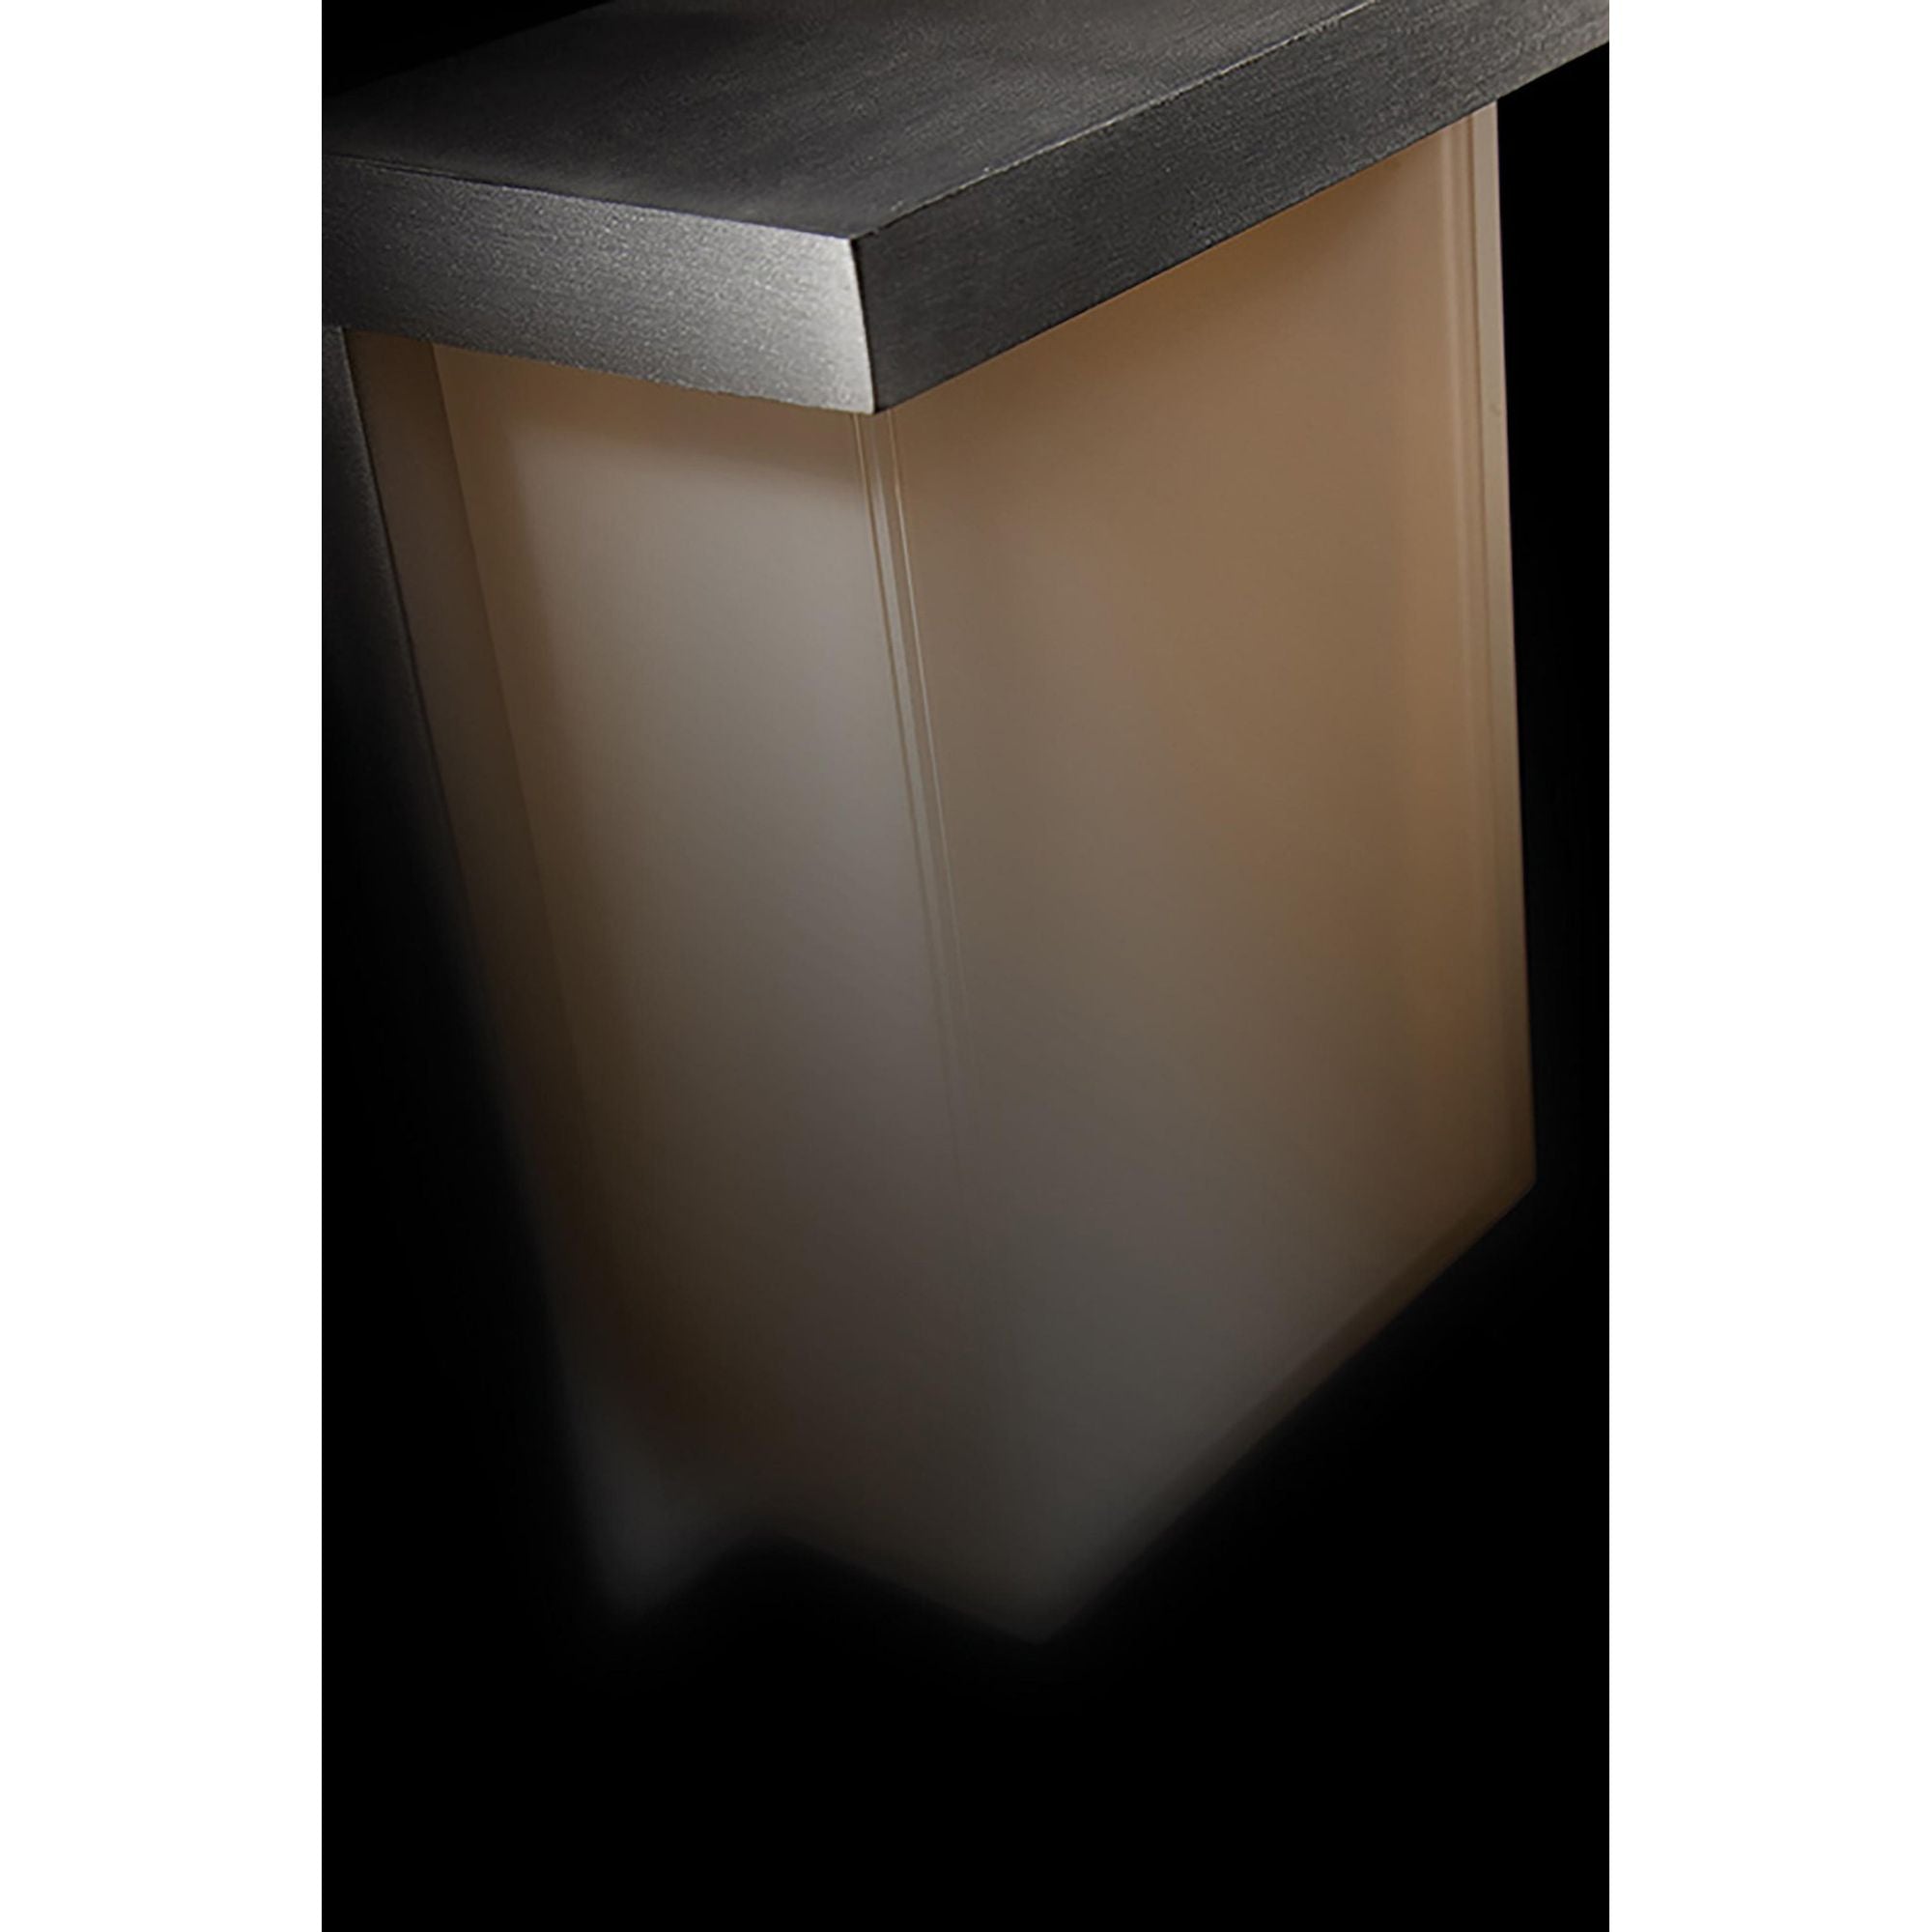 Ledge 8in LED Indoor or Outdoor Wall Light 2700K in Brushed Aluminum